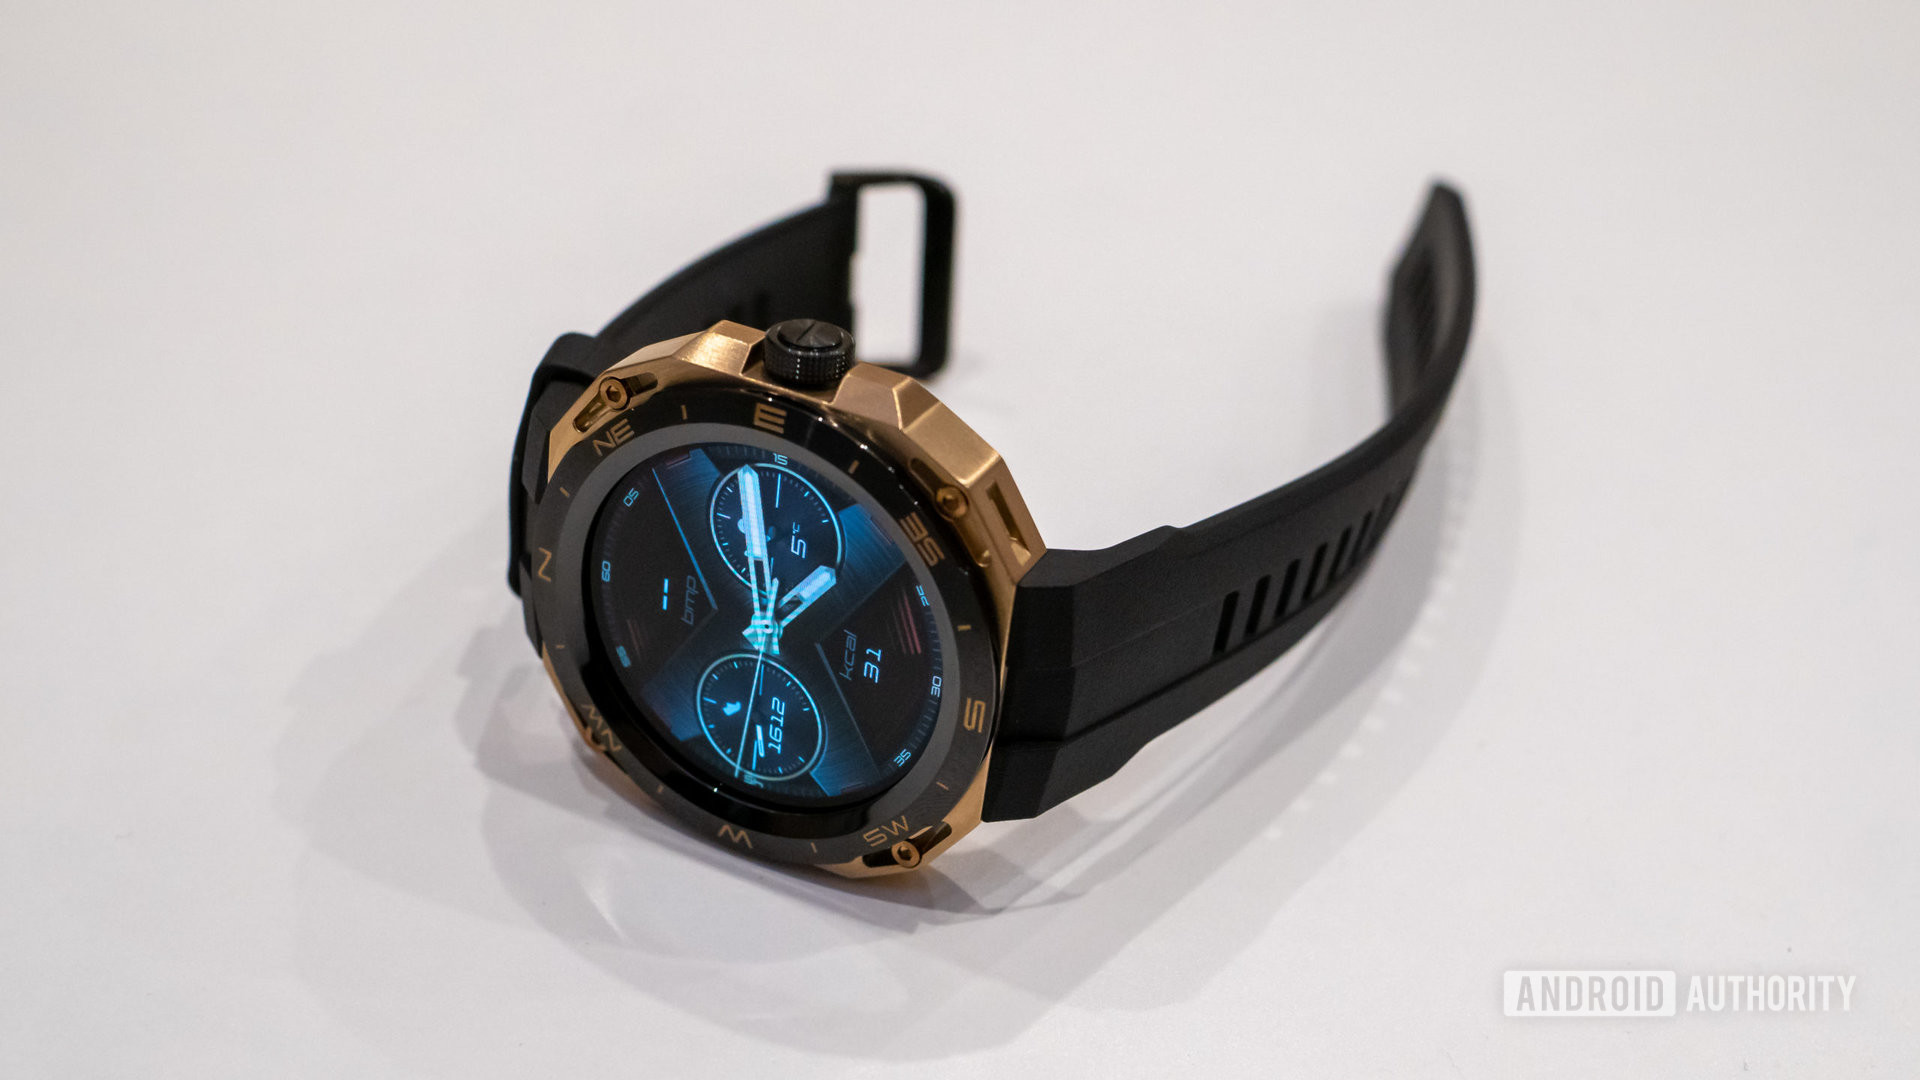 Huawei Watch GT Cyber smartwatch laying on a table showing watch face